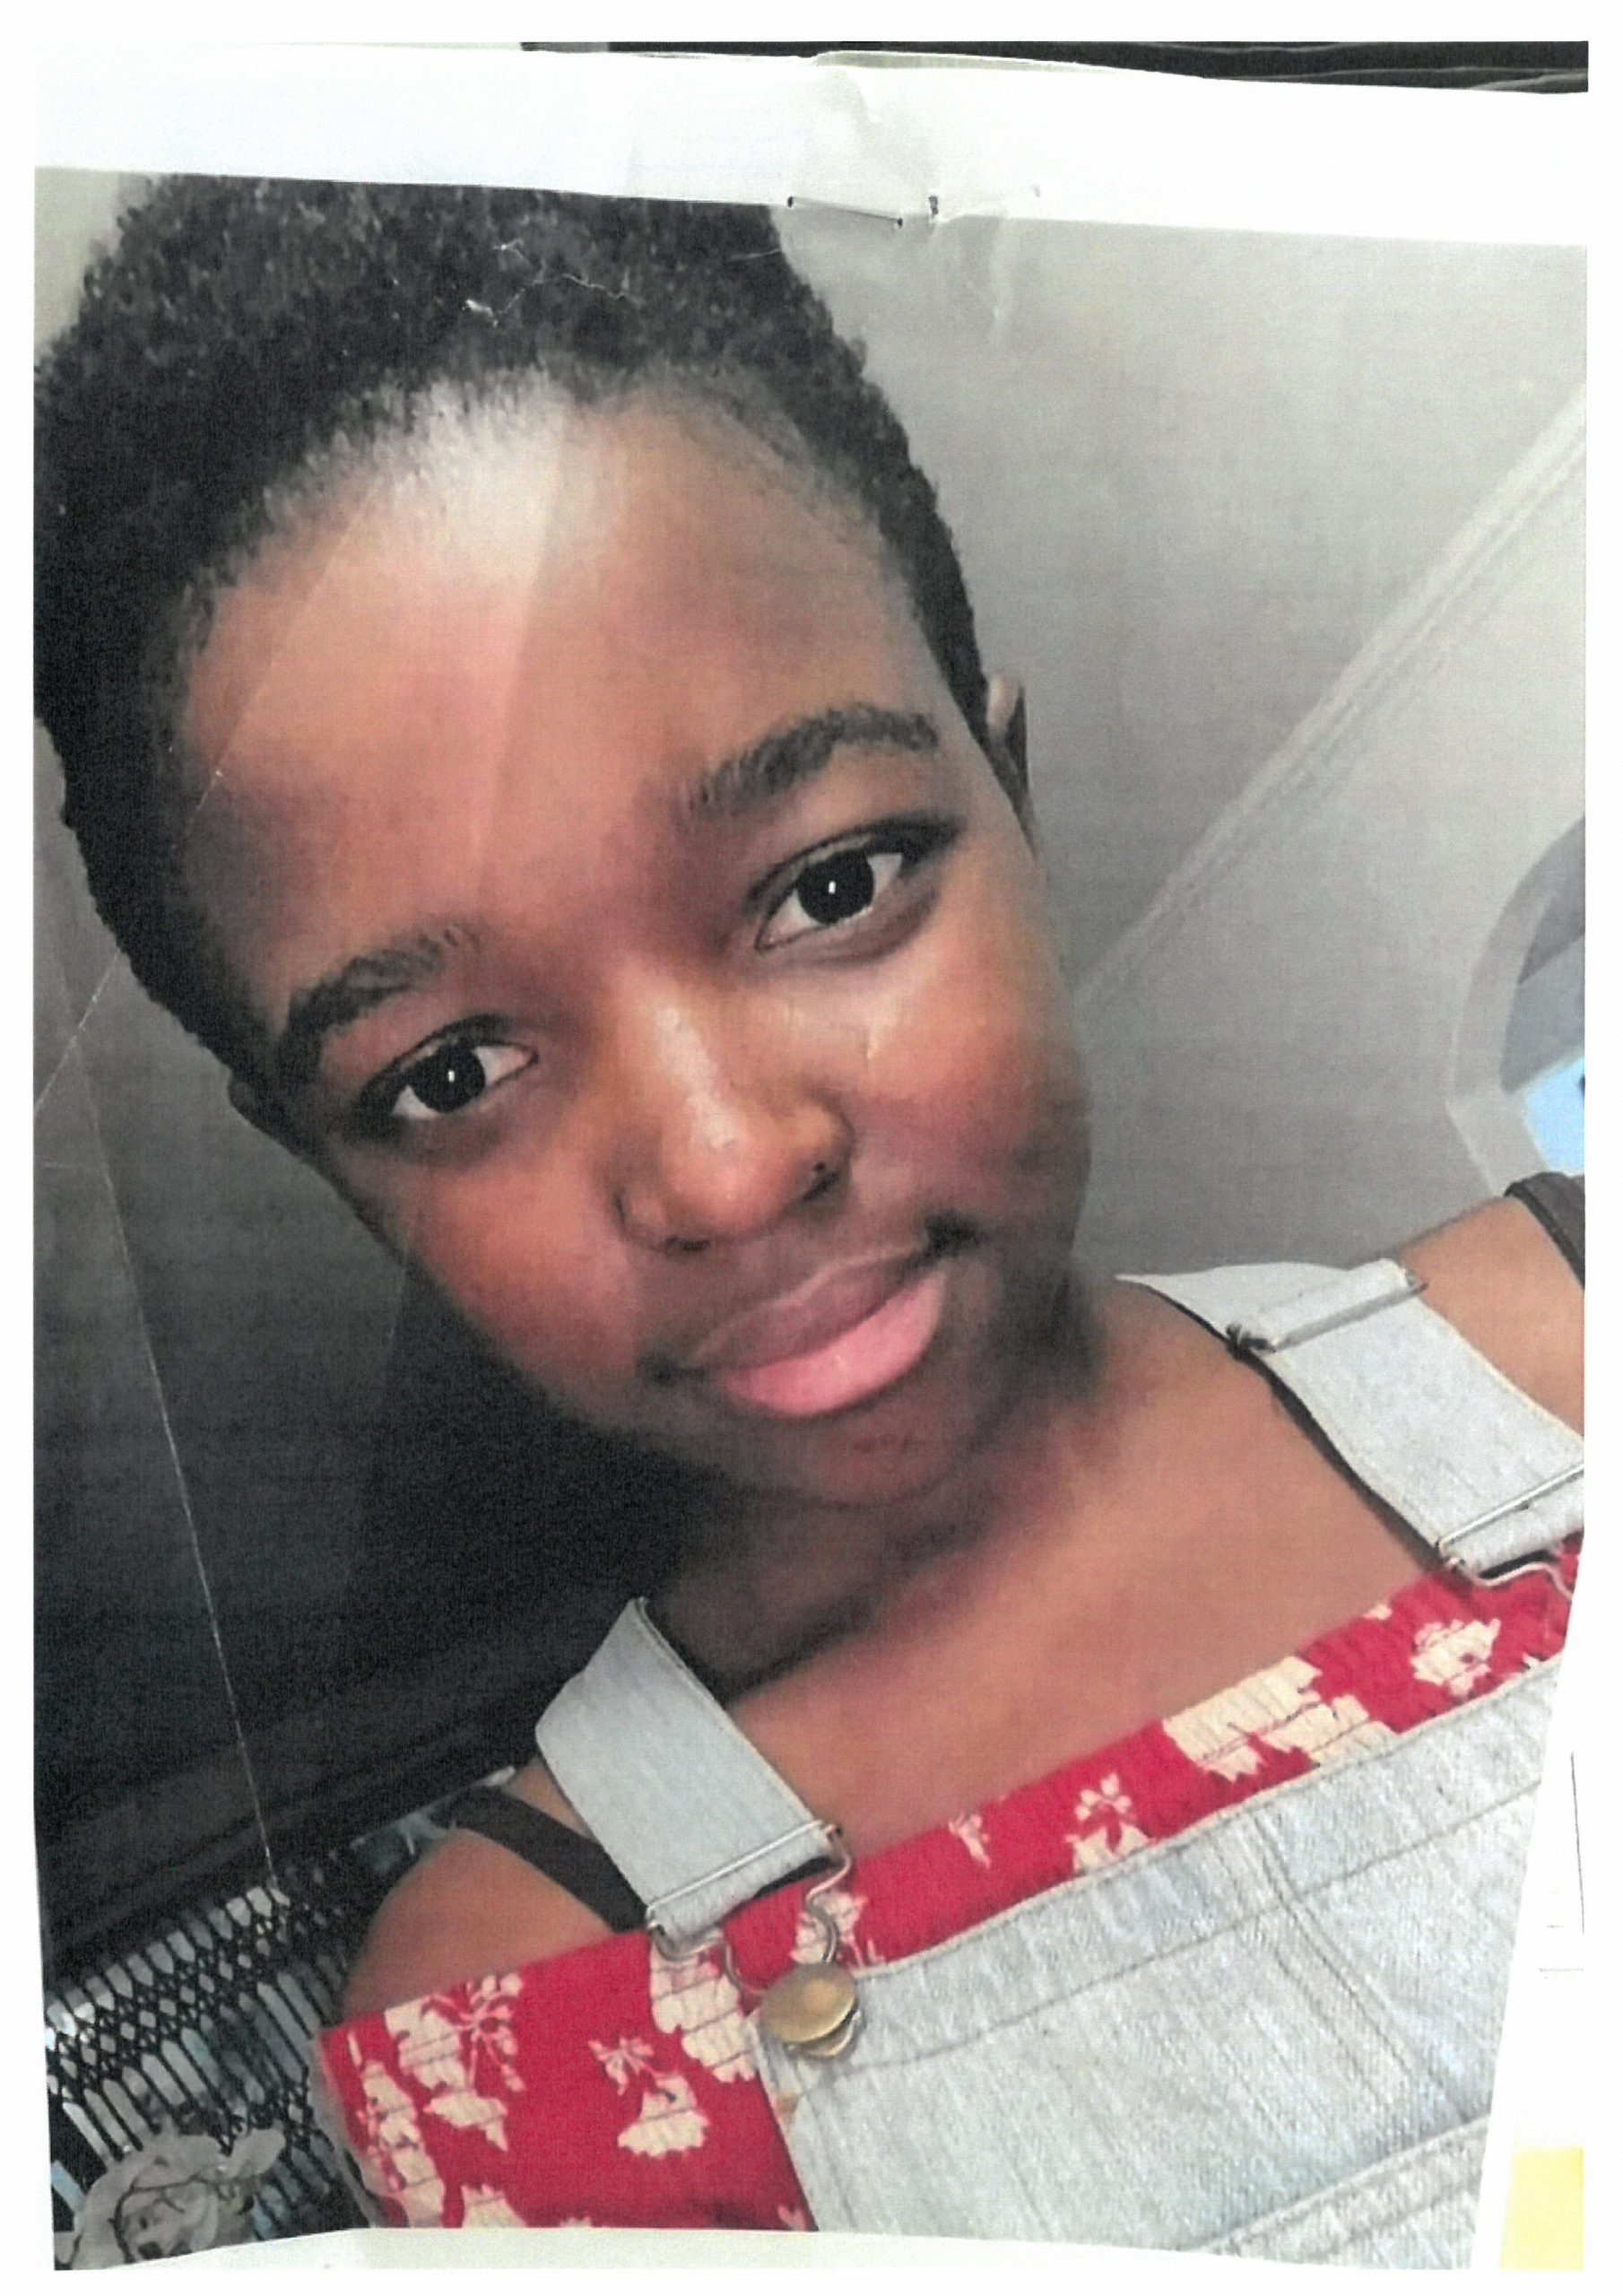 Missing child sought by Montclair police